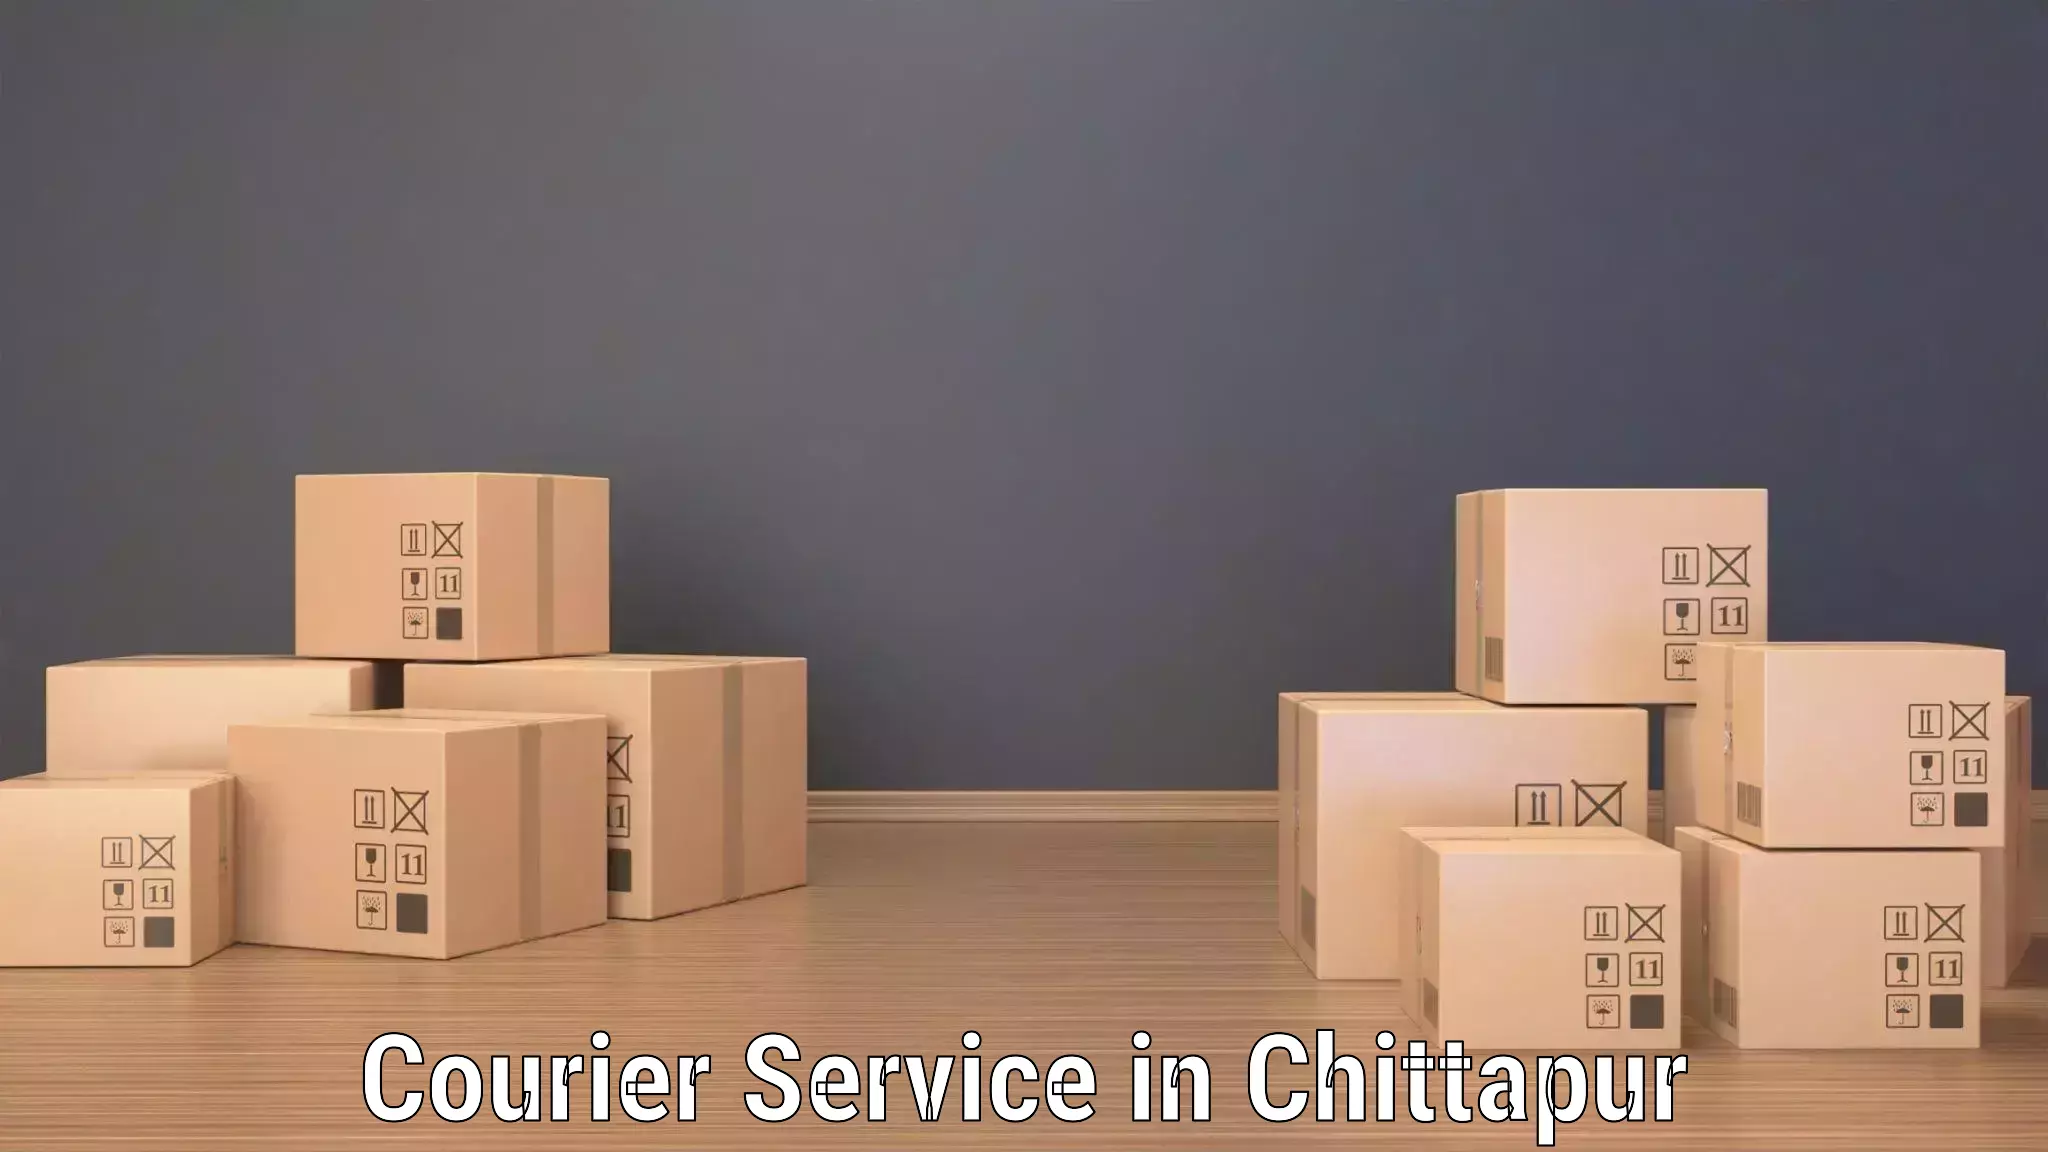 Budget-friendly shipping in Chittapur